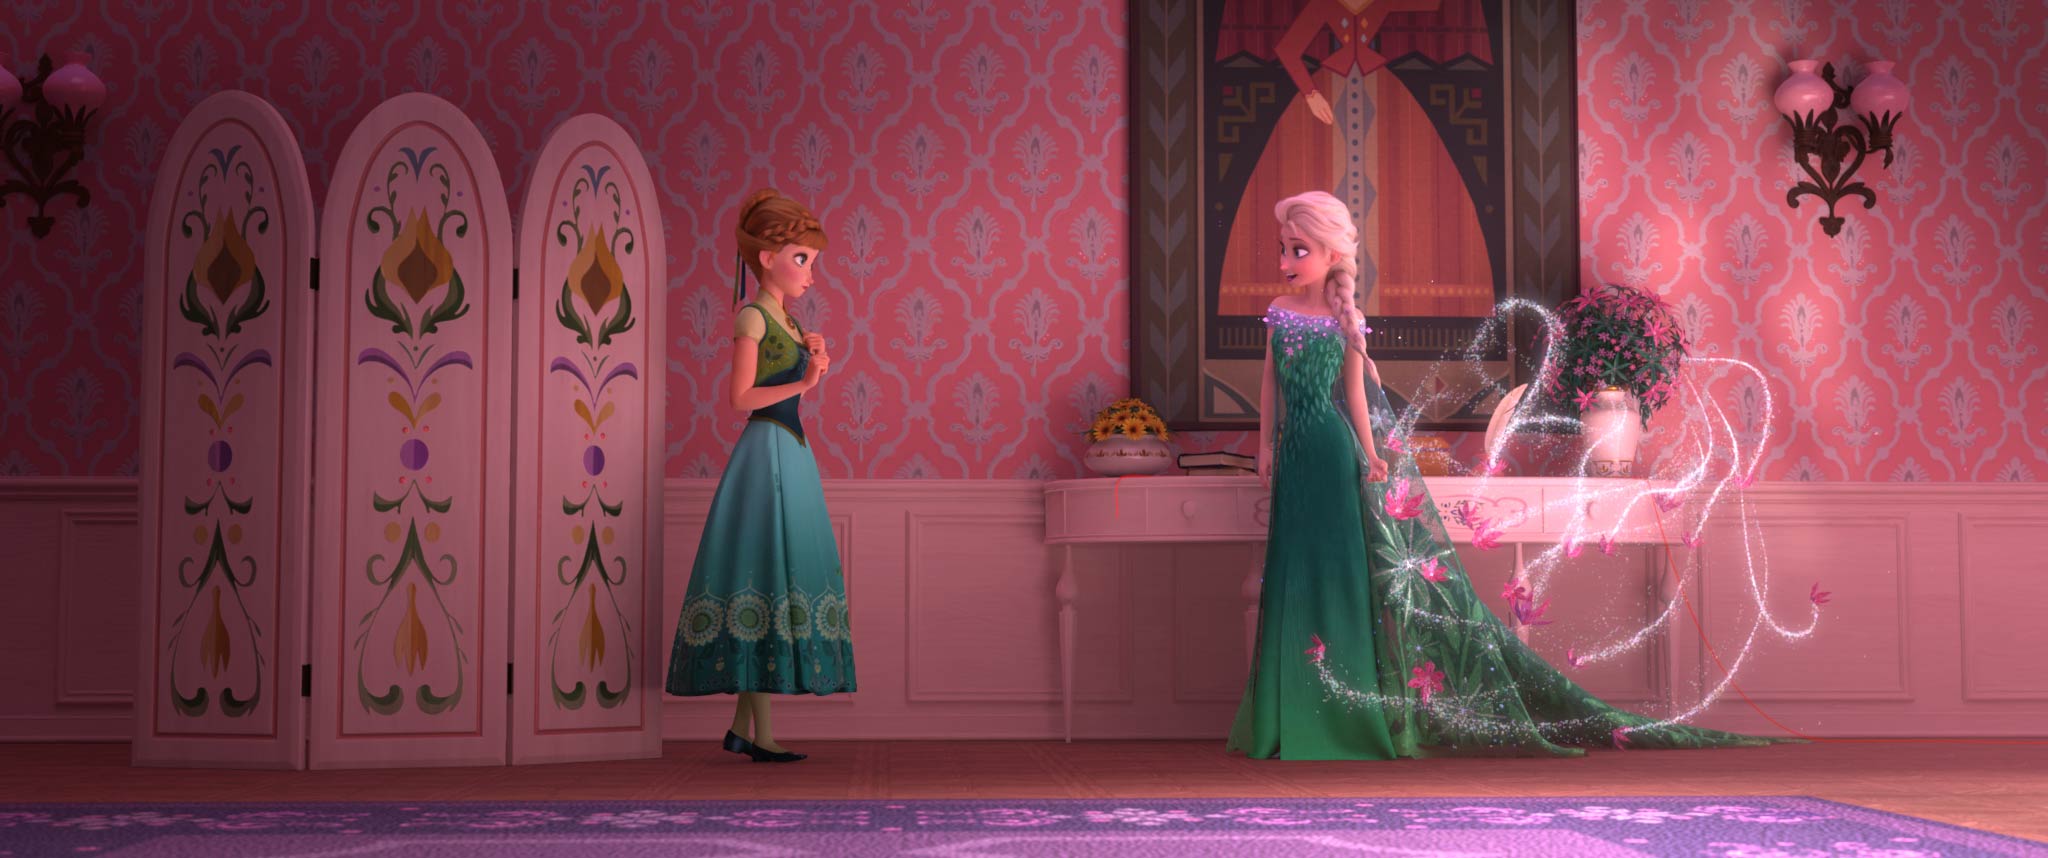 Elsa celebrates Anna's birthday by throwing a party full of surprises and presents, including summer dresses, until Elsa's icy powers have a few unintended consequences.